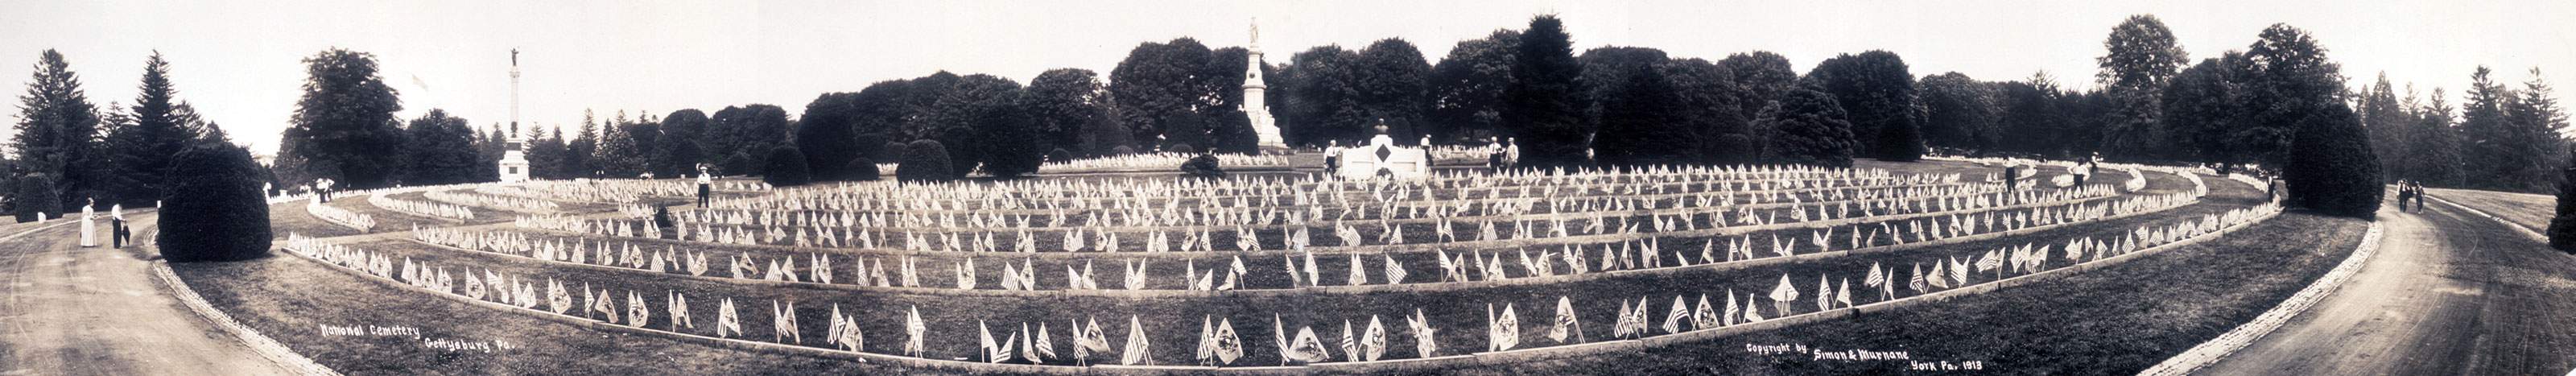 Soldiers' National Cemetery, Gettysburg, Pennsylvania, 1913, zoomable image